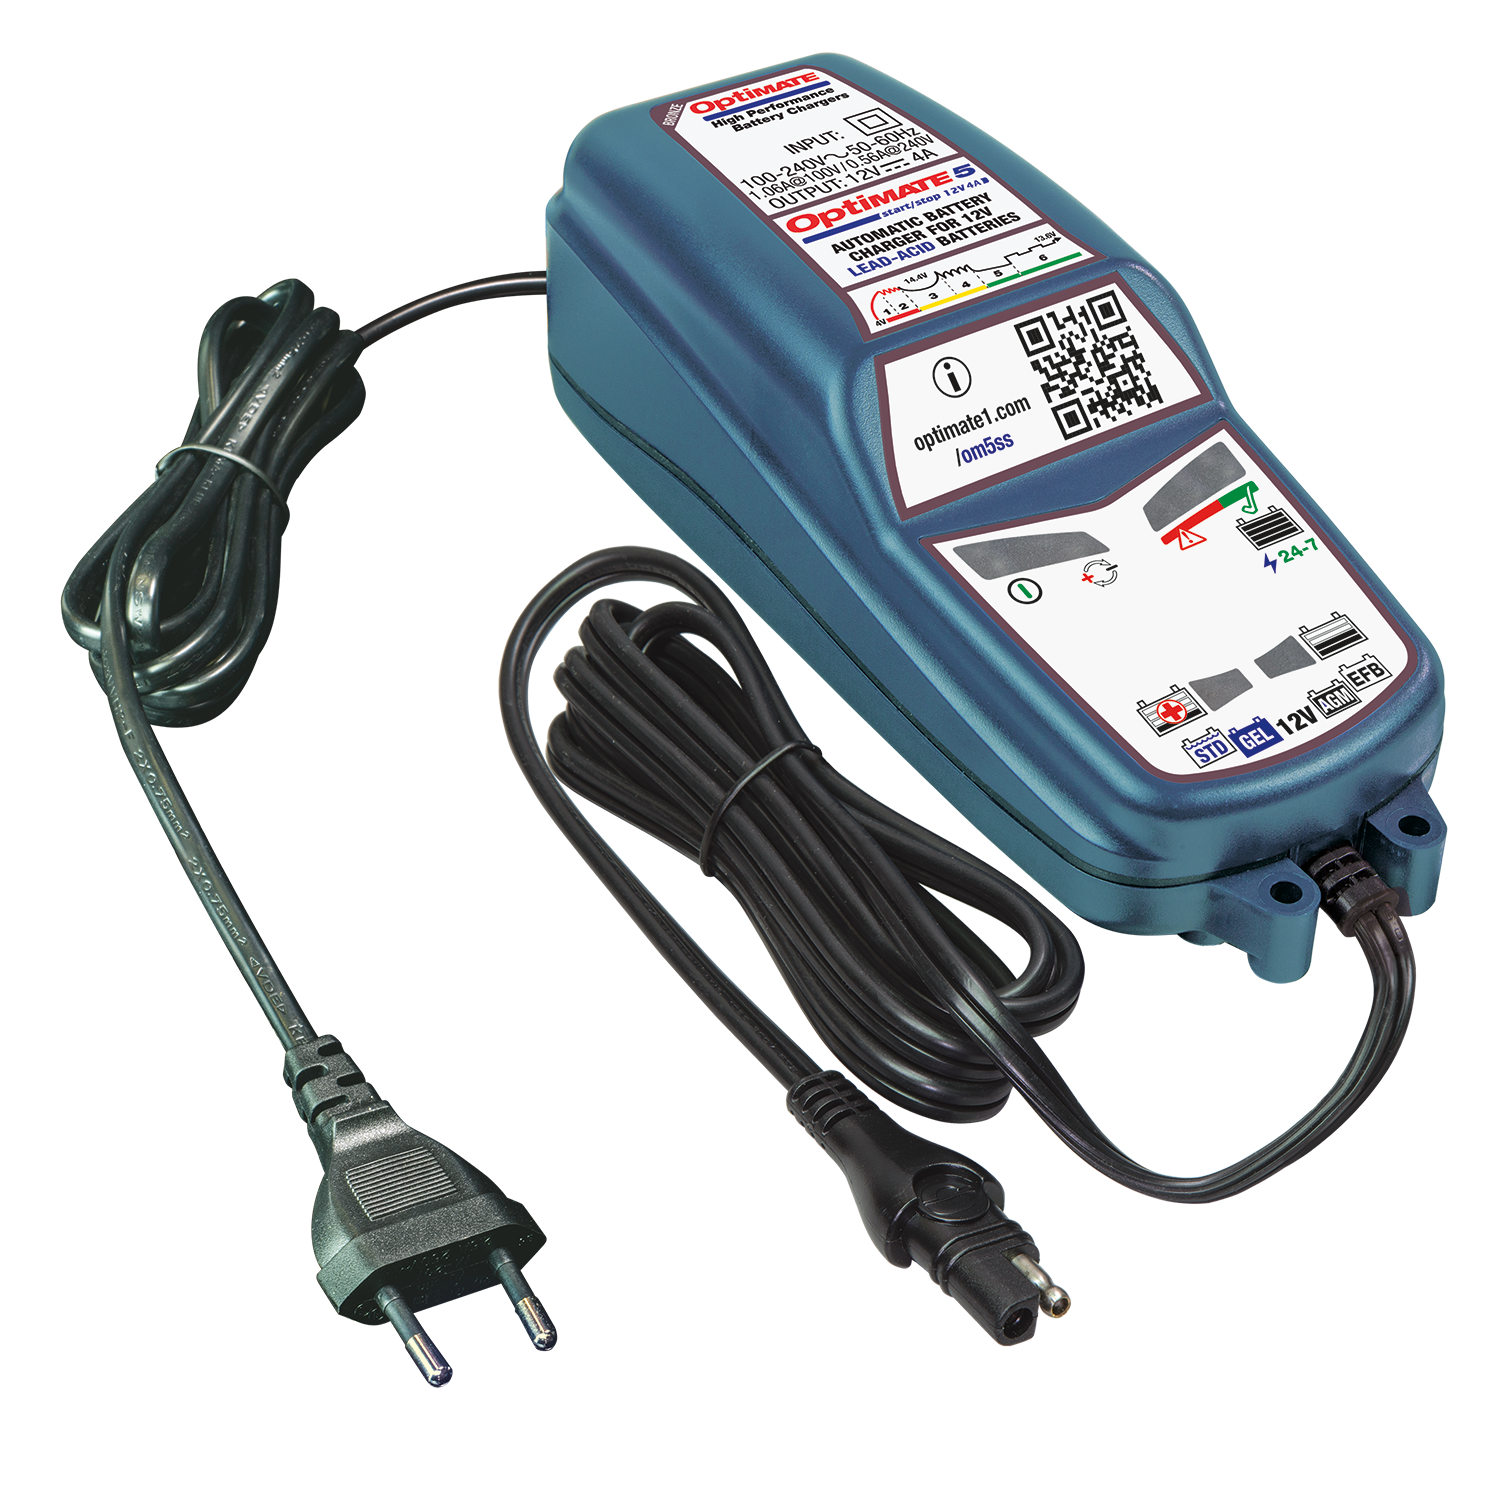 OptiMate TM-221: 5 Start/Stop Automatic Battery Power Charger & Maintainer  [4 Amps / 12 V] - JEGS